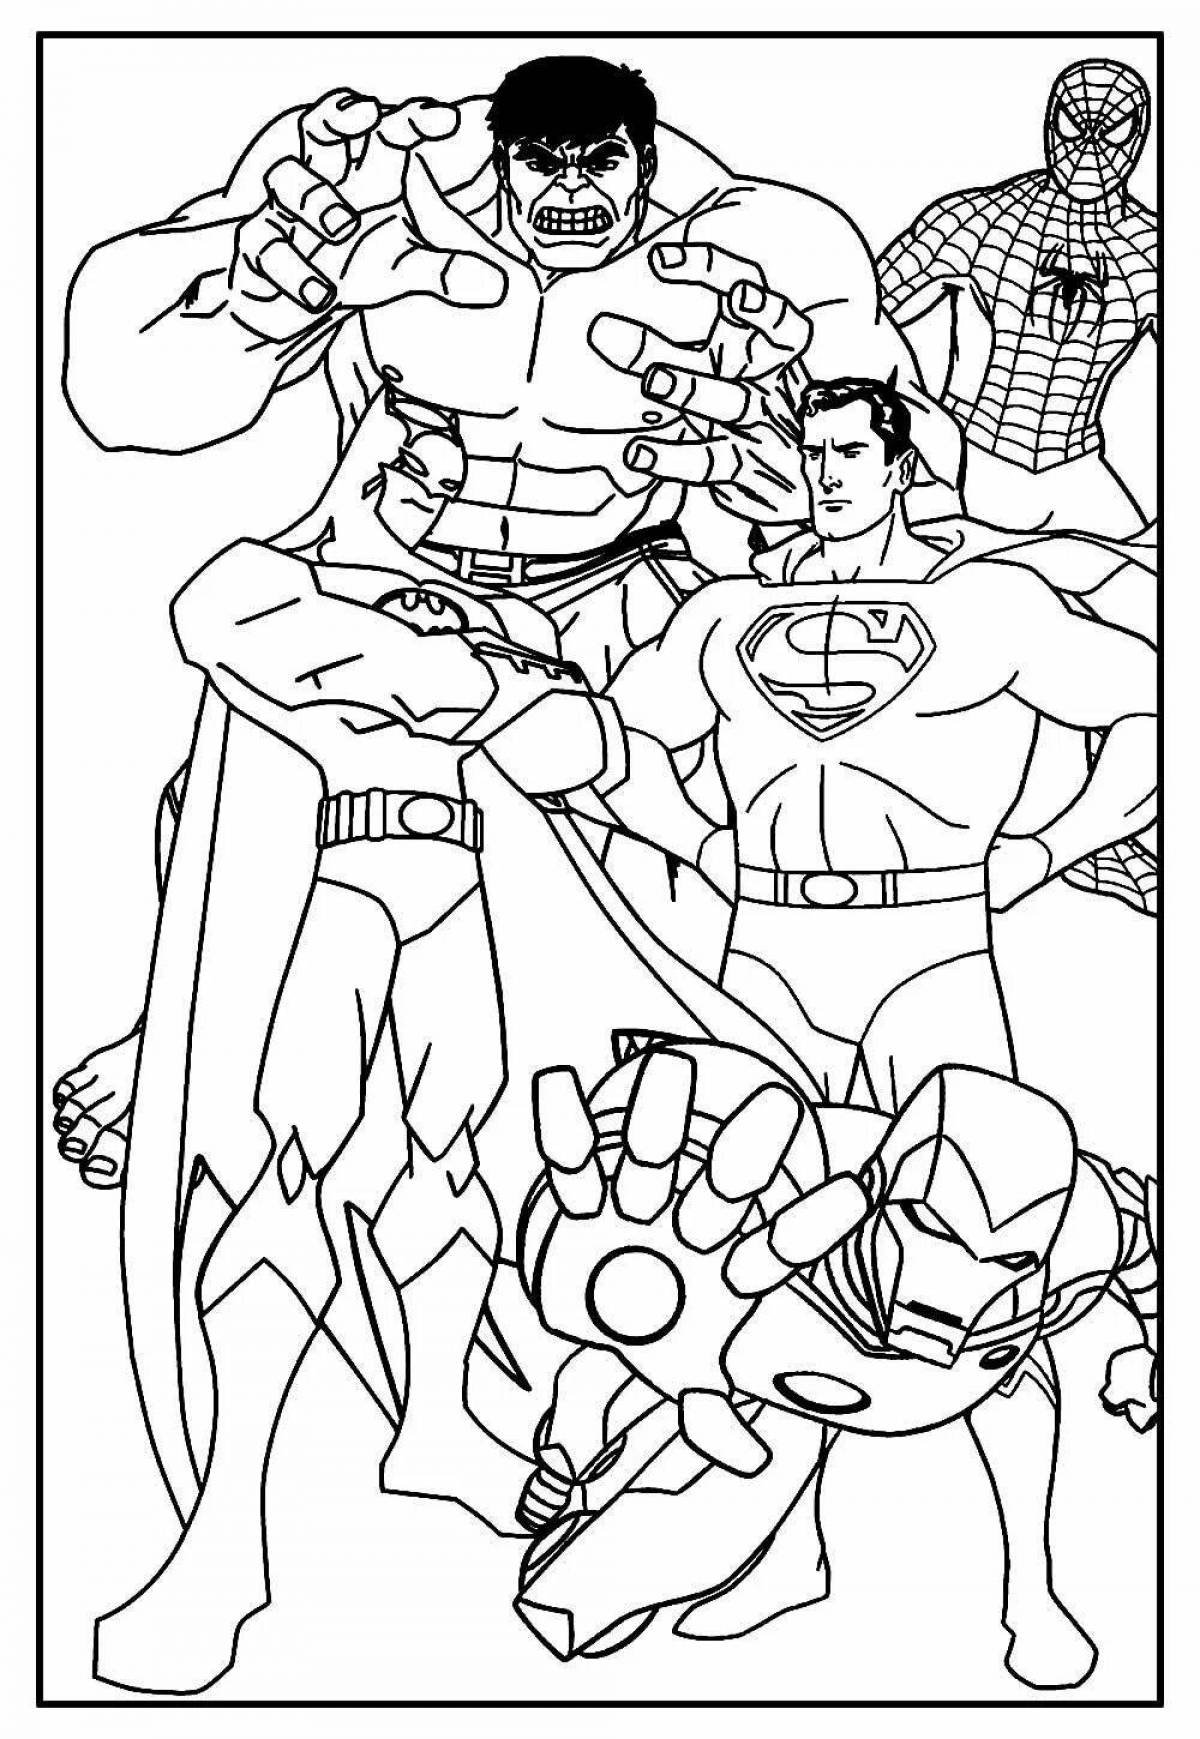 Brave superman and spiderman coloring book